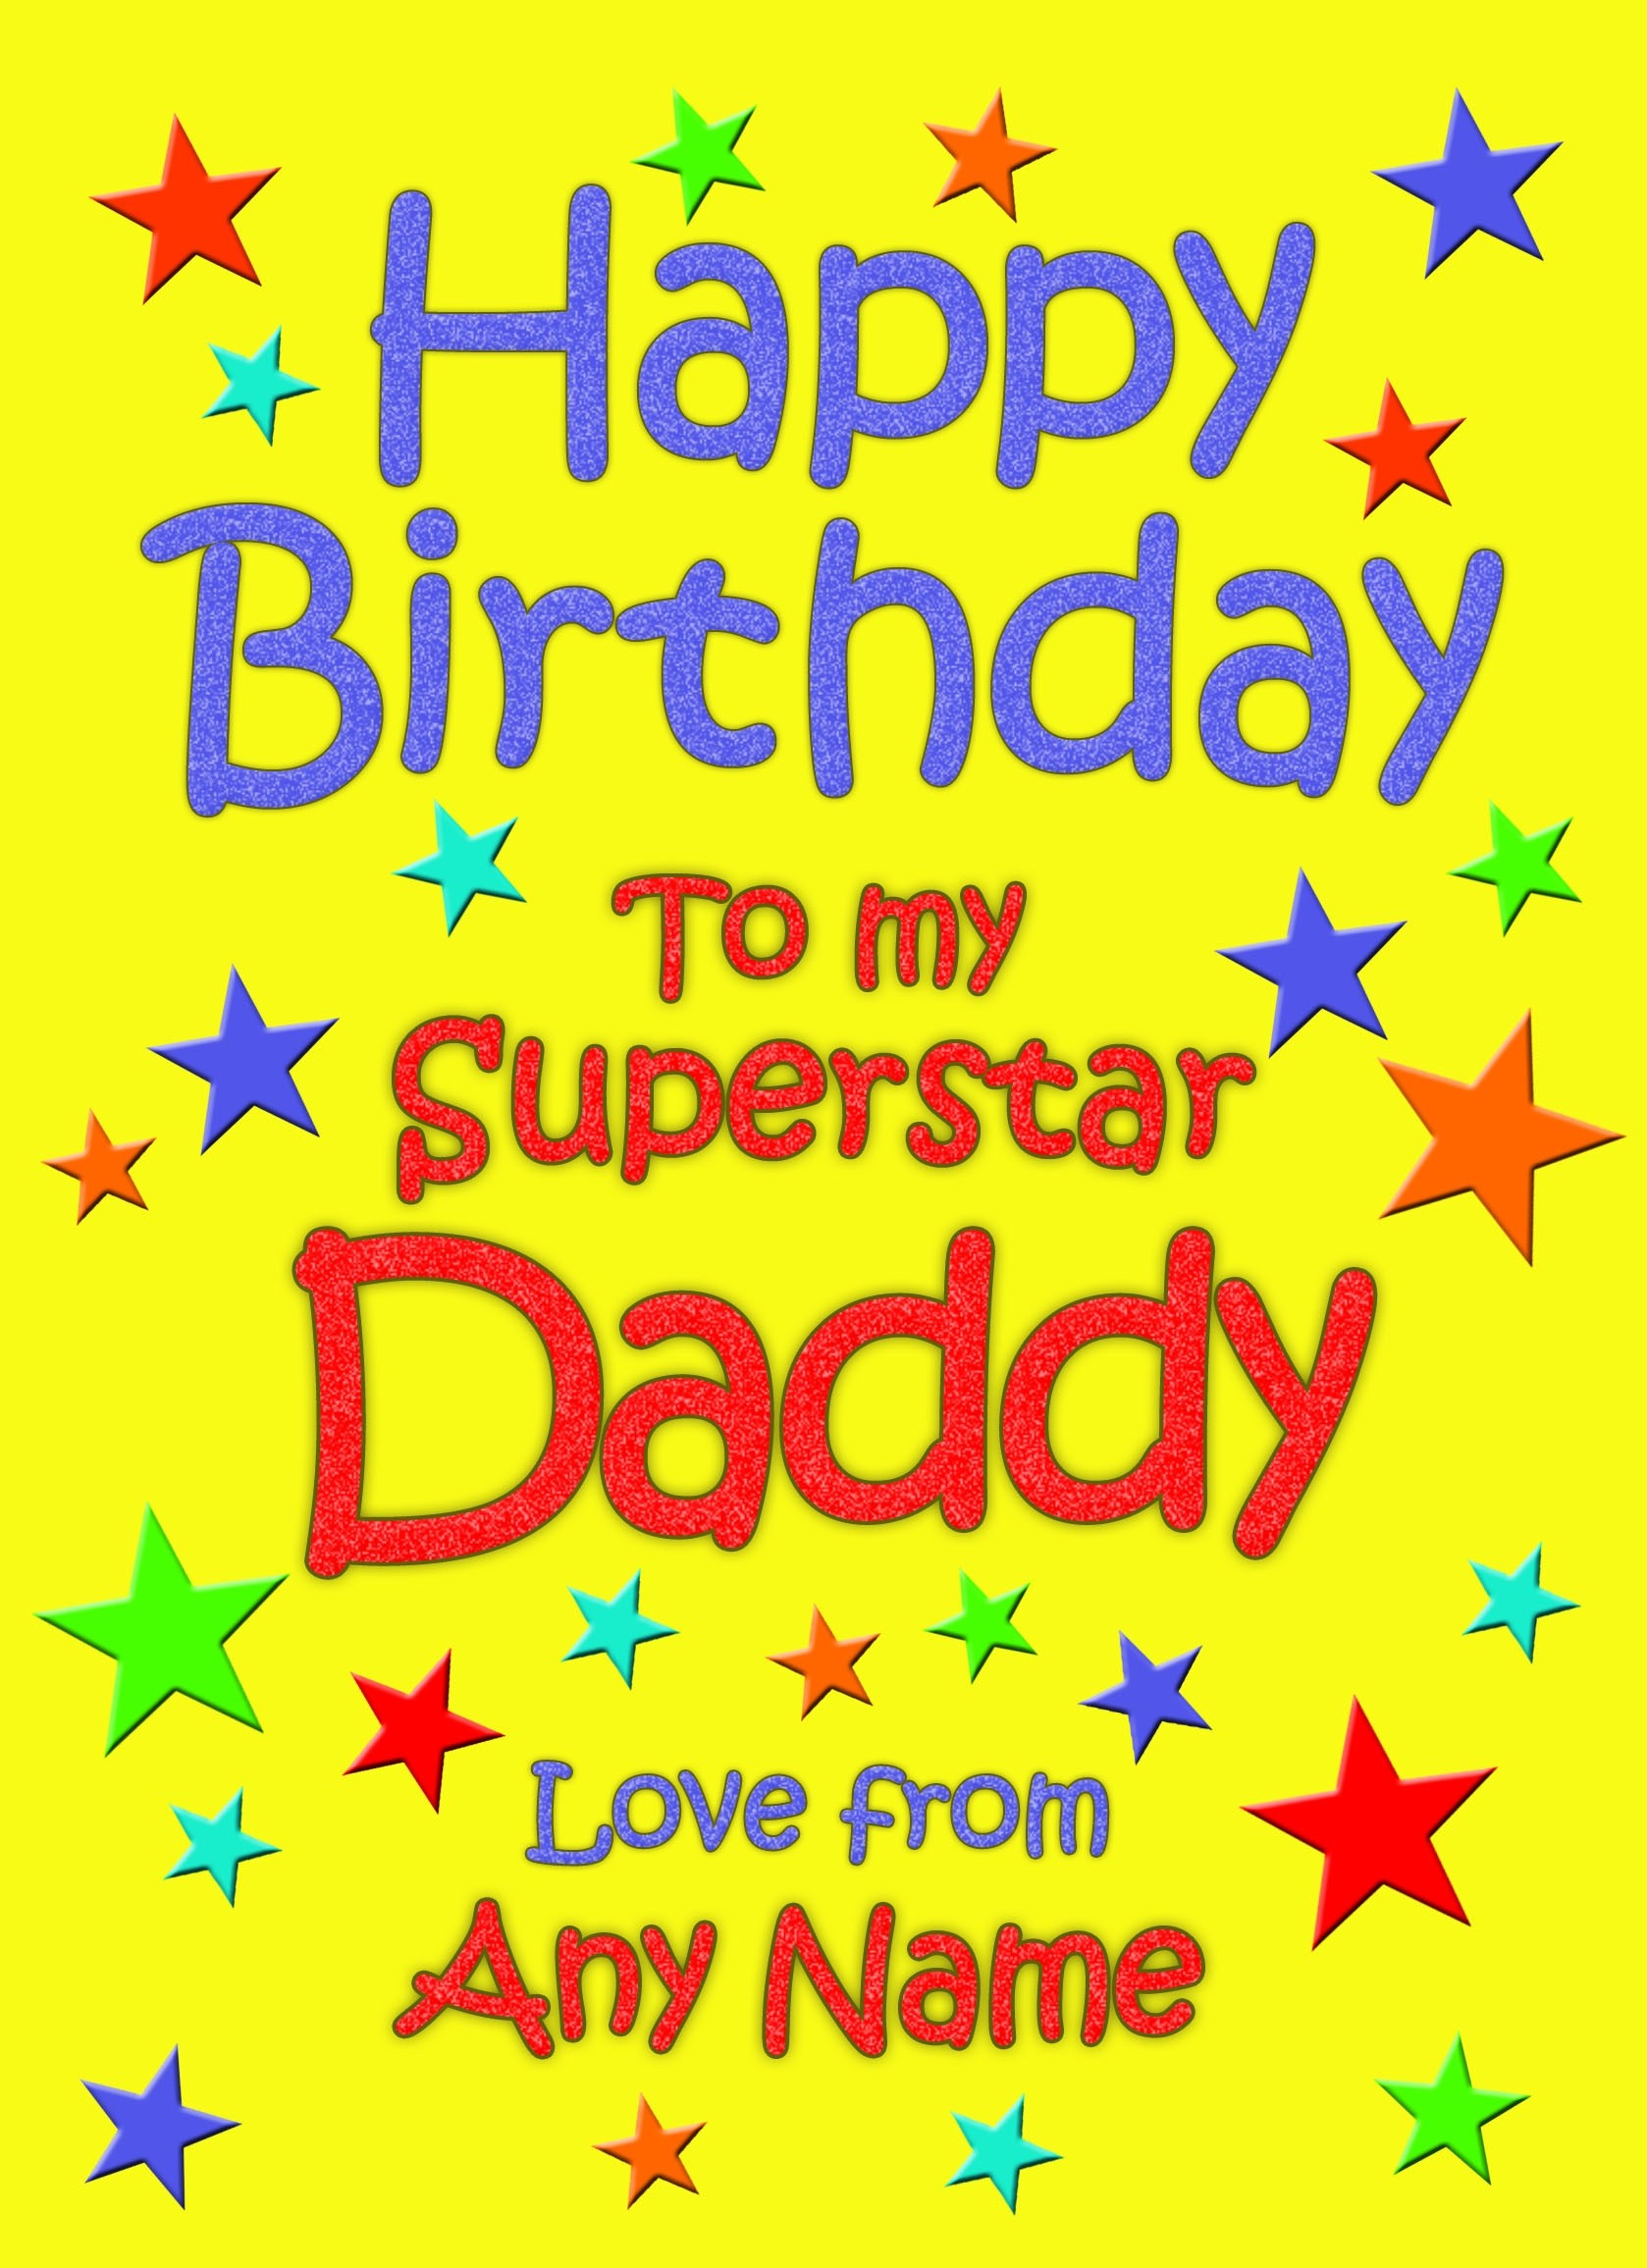 Personalised Daddy Birthday Card (Yellow)